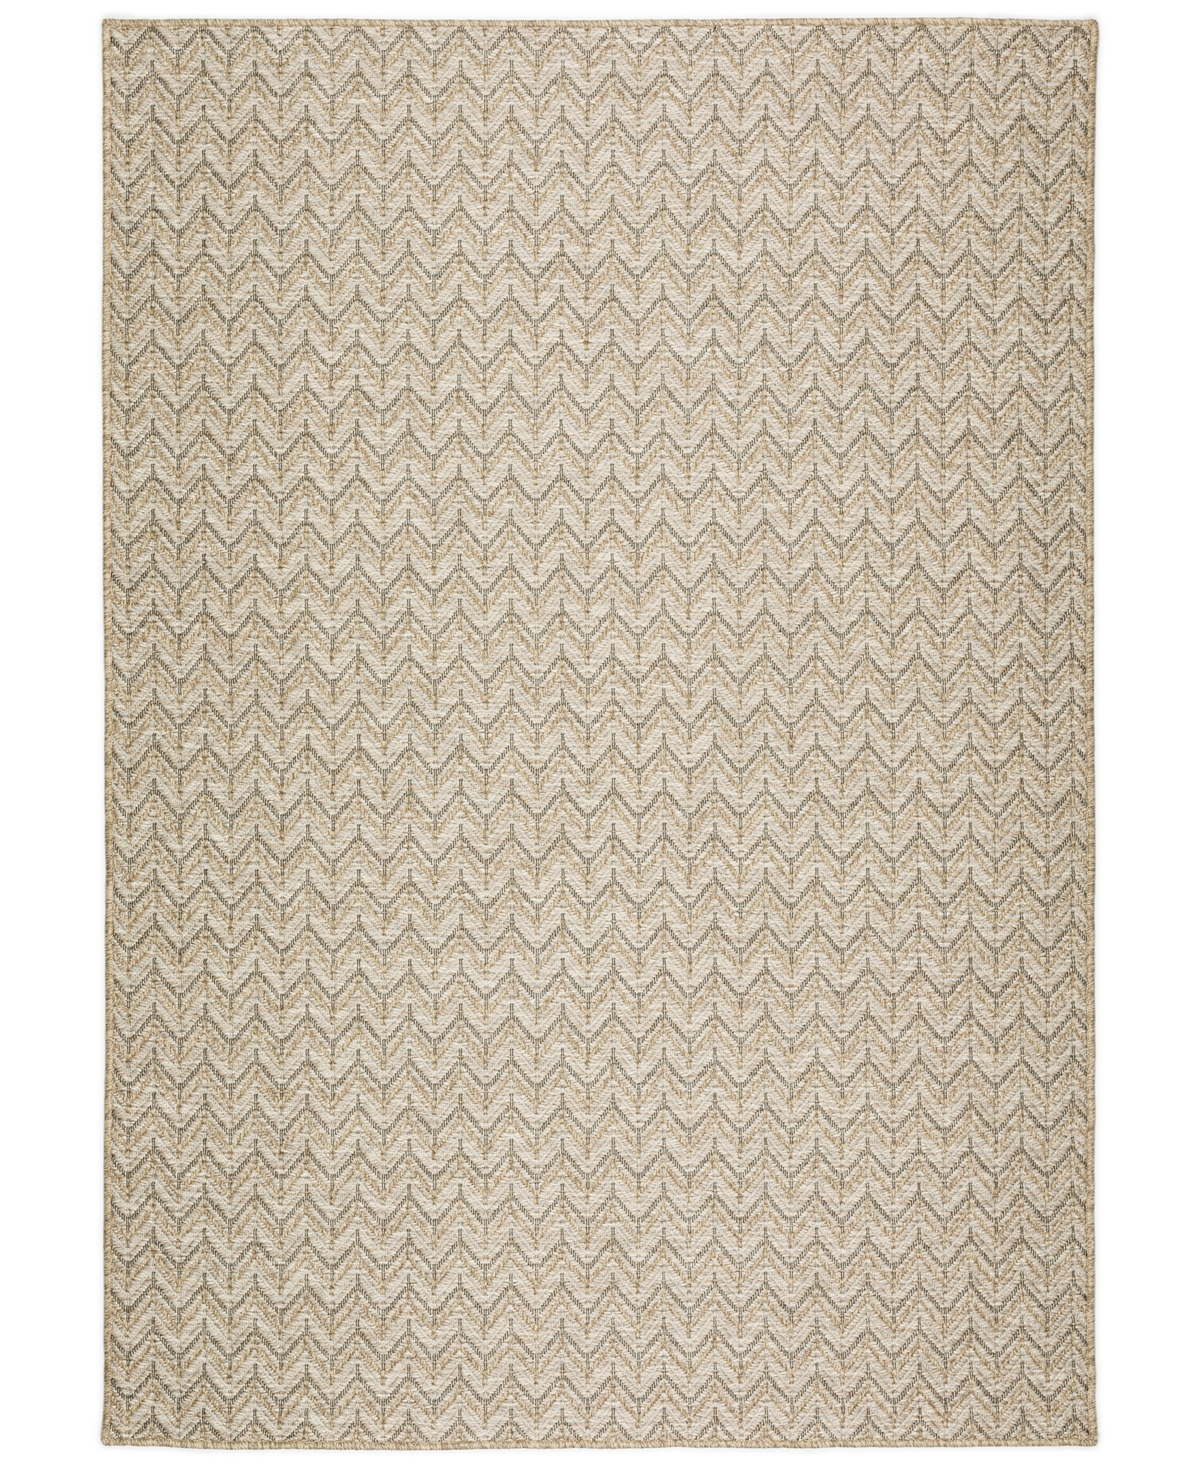 D Style Nusa Outdoor Nsa1 12' X 15' Area Rug In Beige